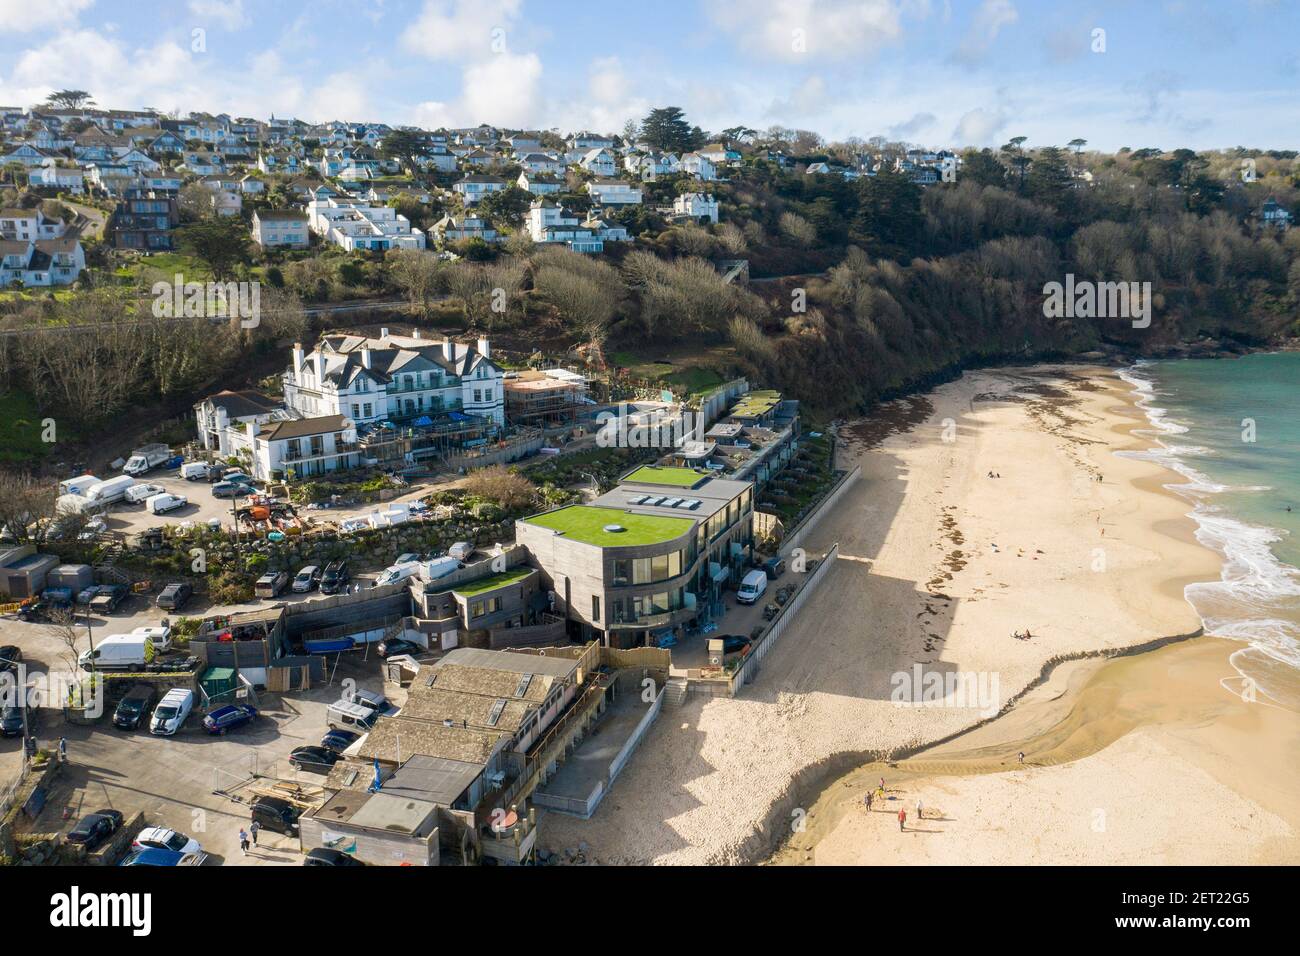 Carbis Bay hotel near St Ives, West Cornwall where the G7 summit is due to take place in June 2021 Stock Photo